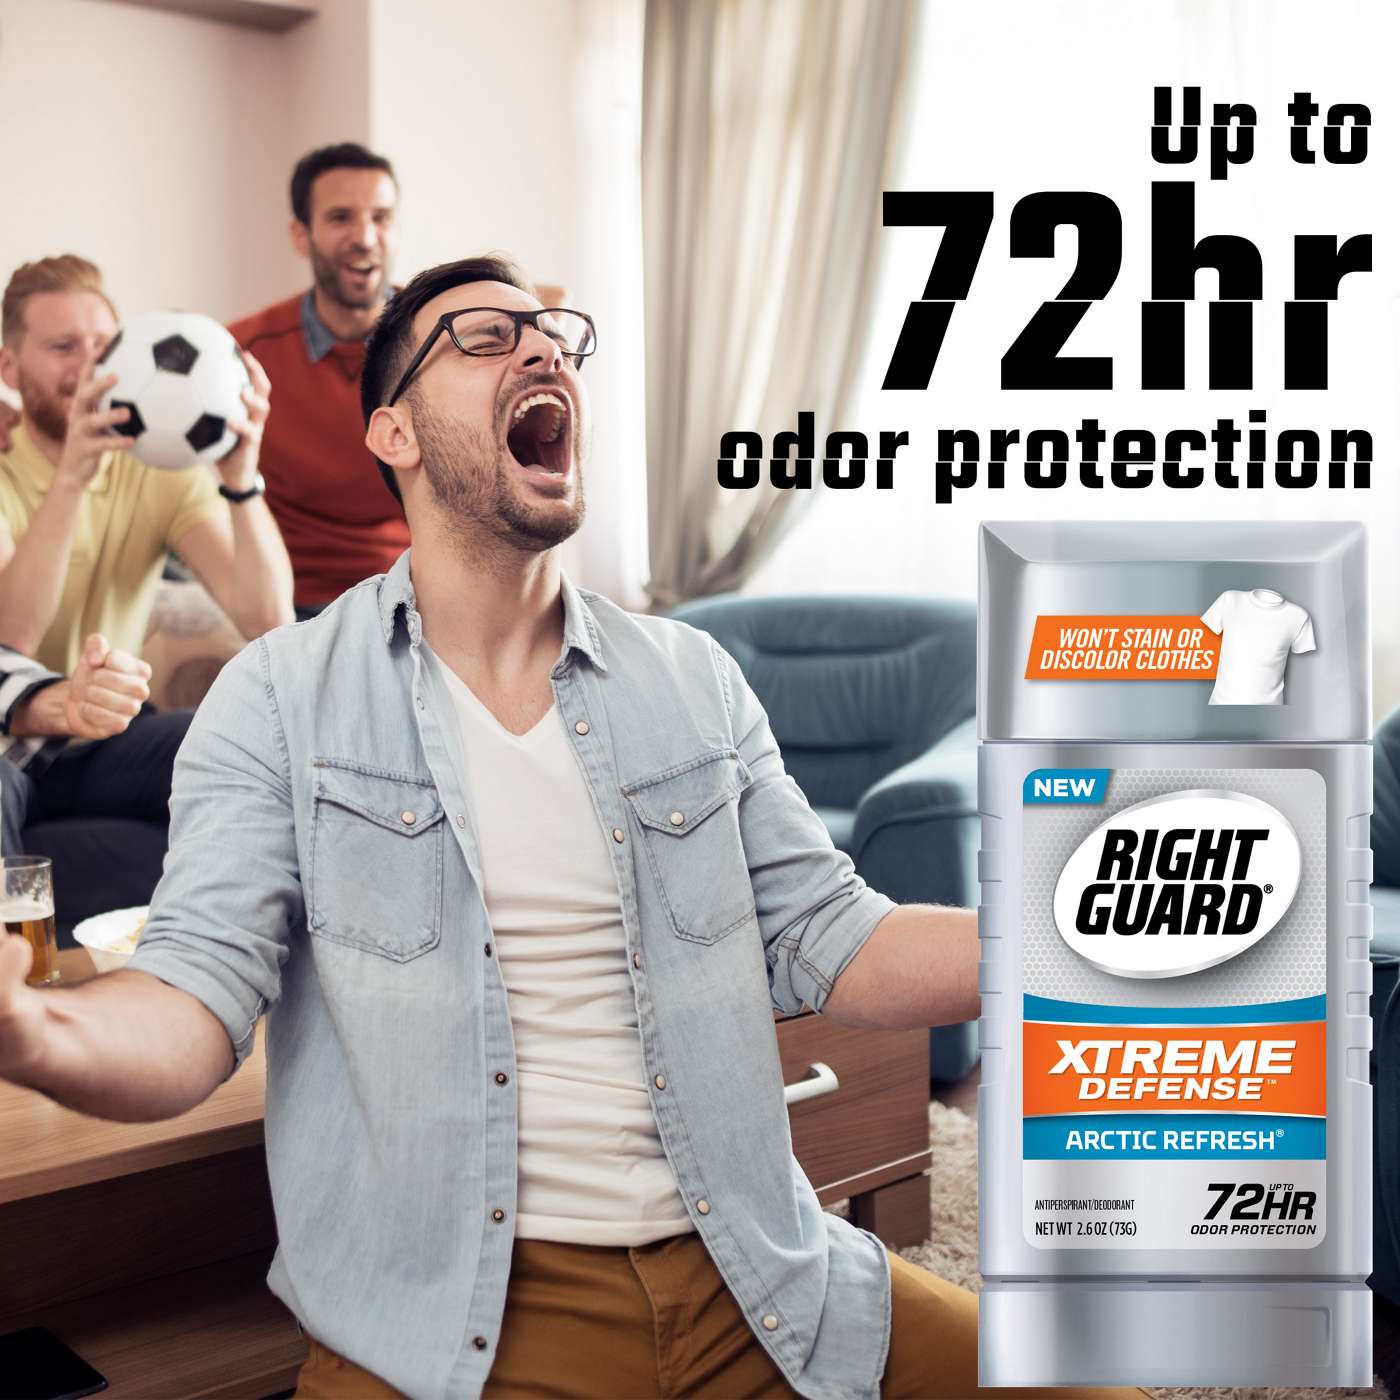 Right Guard Xtreme Defense Antiperspirant Deodorant Invisible Solid Stick, Arctic Refresh; image 3 of 4